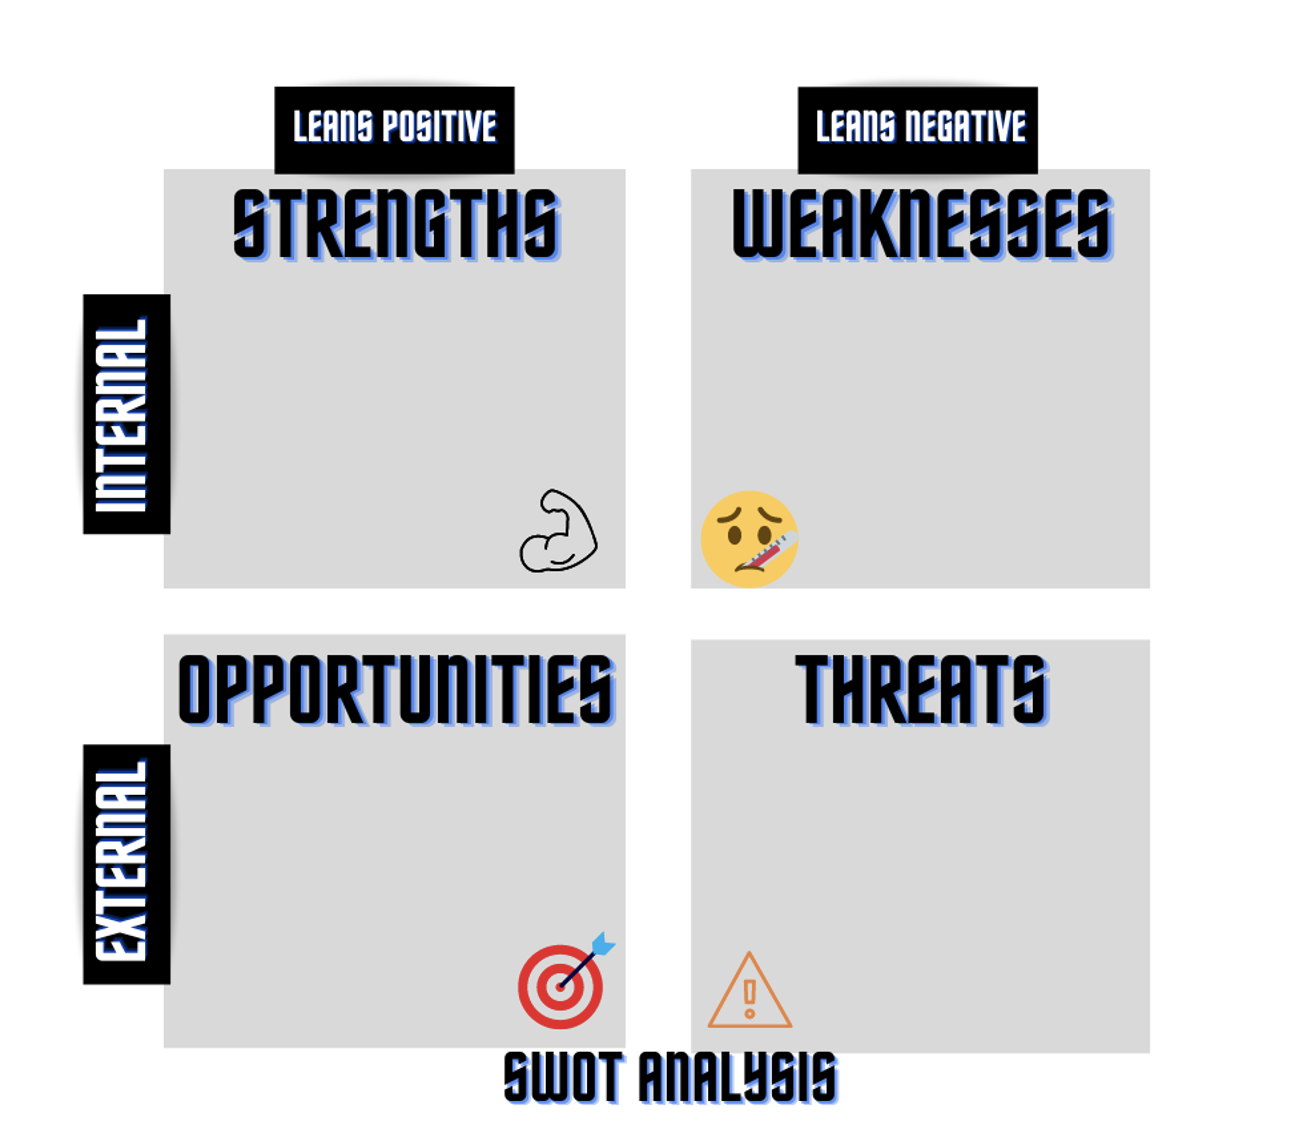 This image is a SWOT analysis grid. It includes quadrants: strengths, weaknesses, opportunities, and threats.